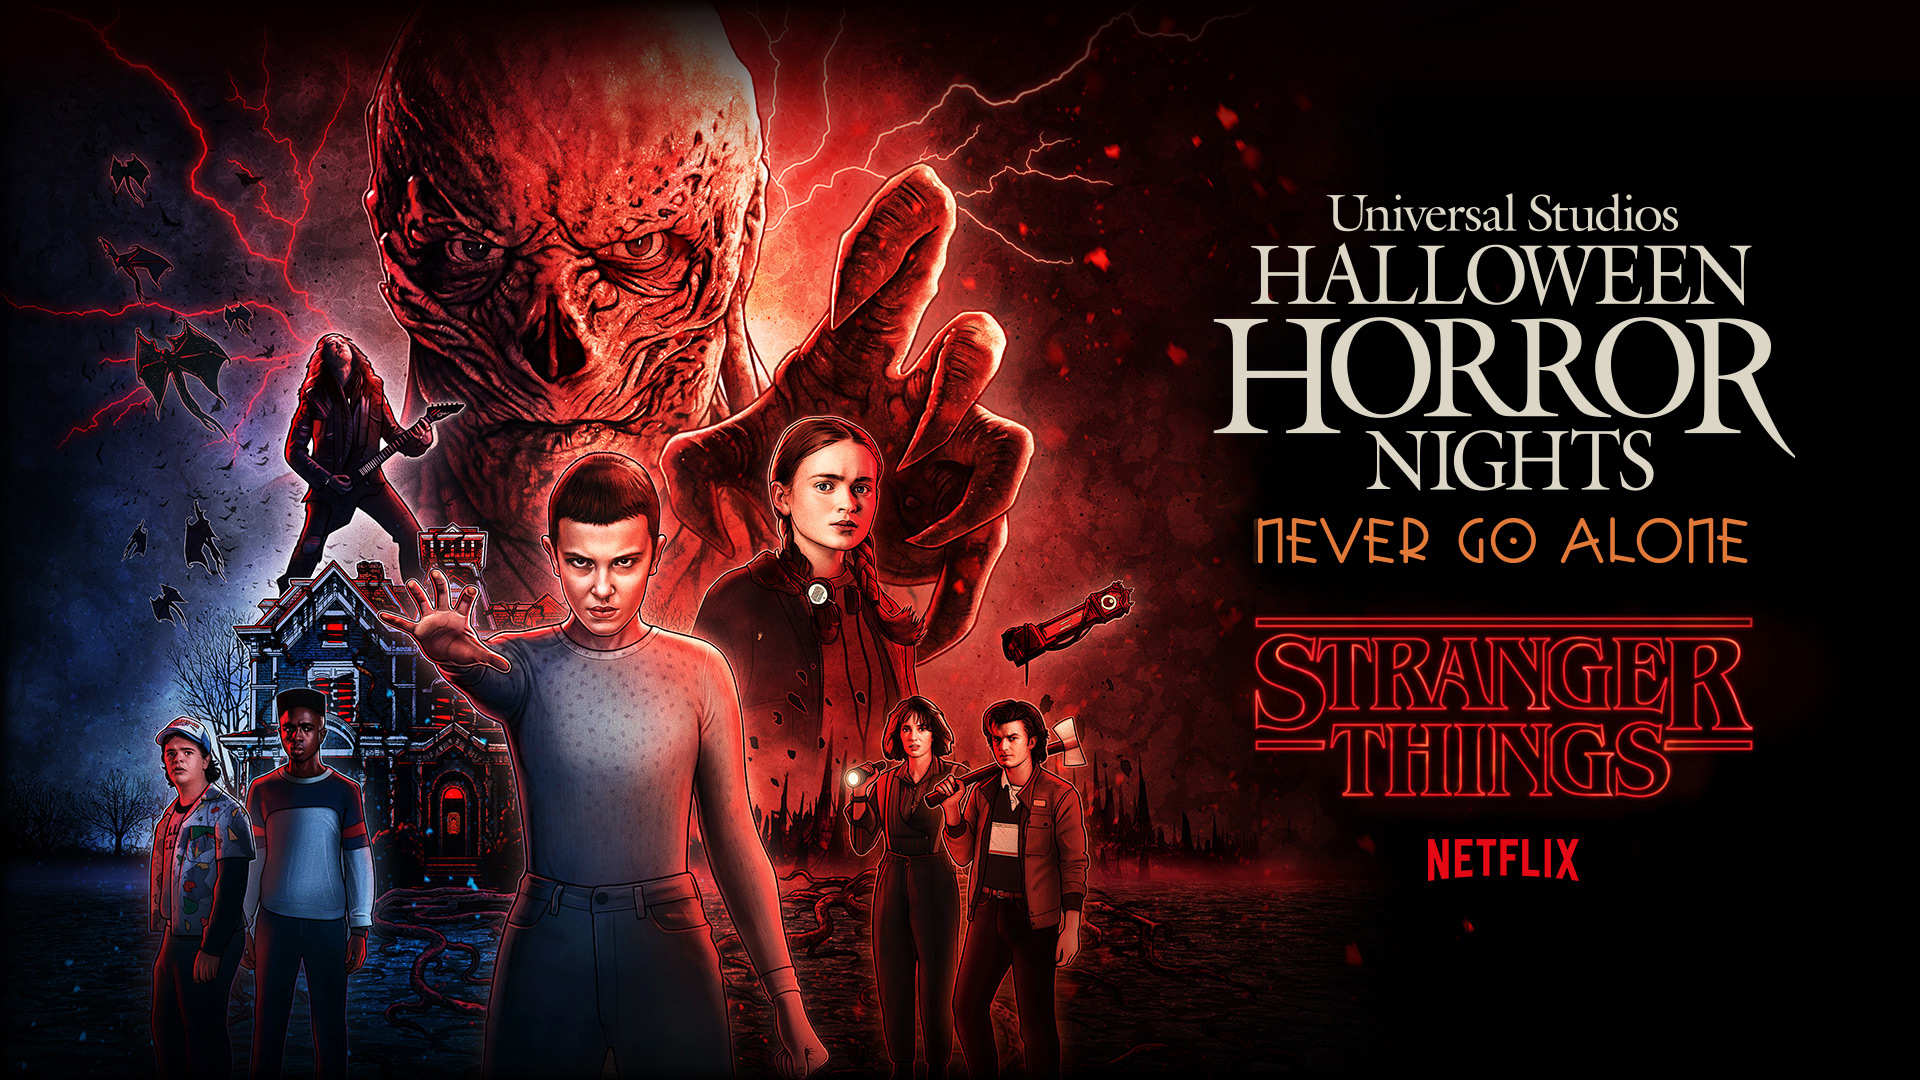 Universal Studios’ Halloween Horror Nights Transports Guests Back to the Upside Down in an All-New Haunted House Inspired by Season 4 of Netflix’s Critically Acclaimed Original Series “Stranger Things”